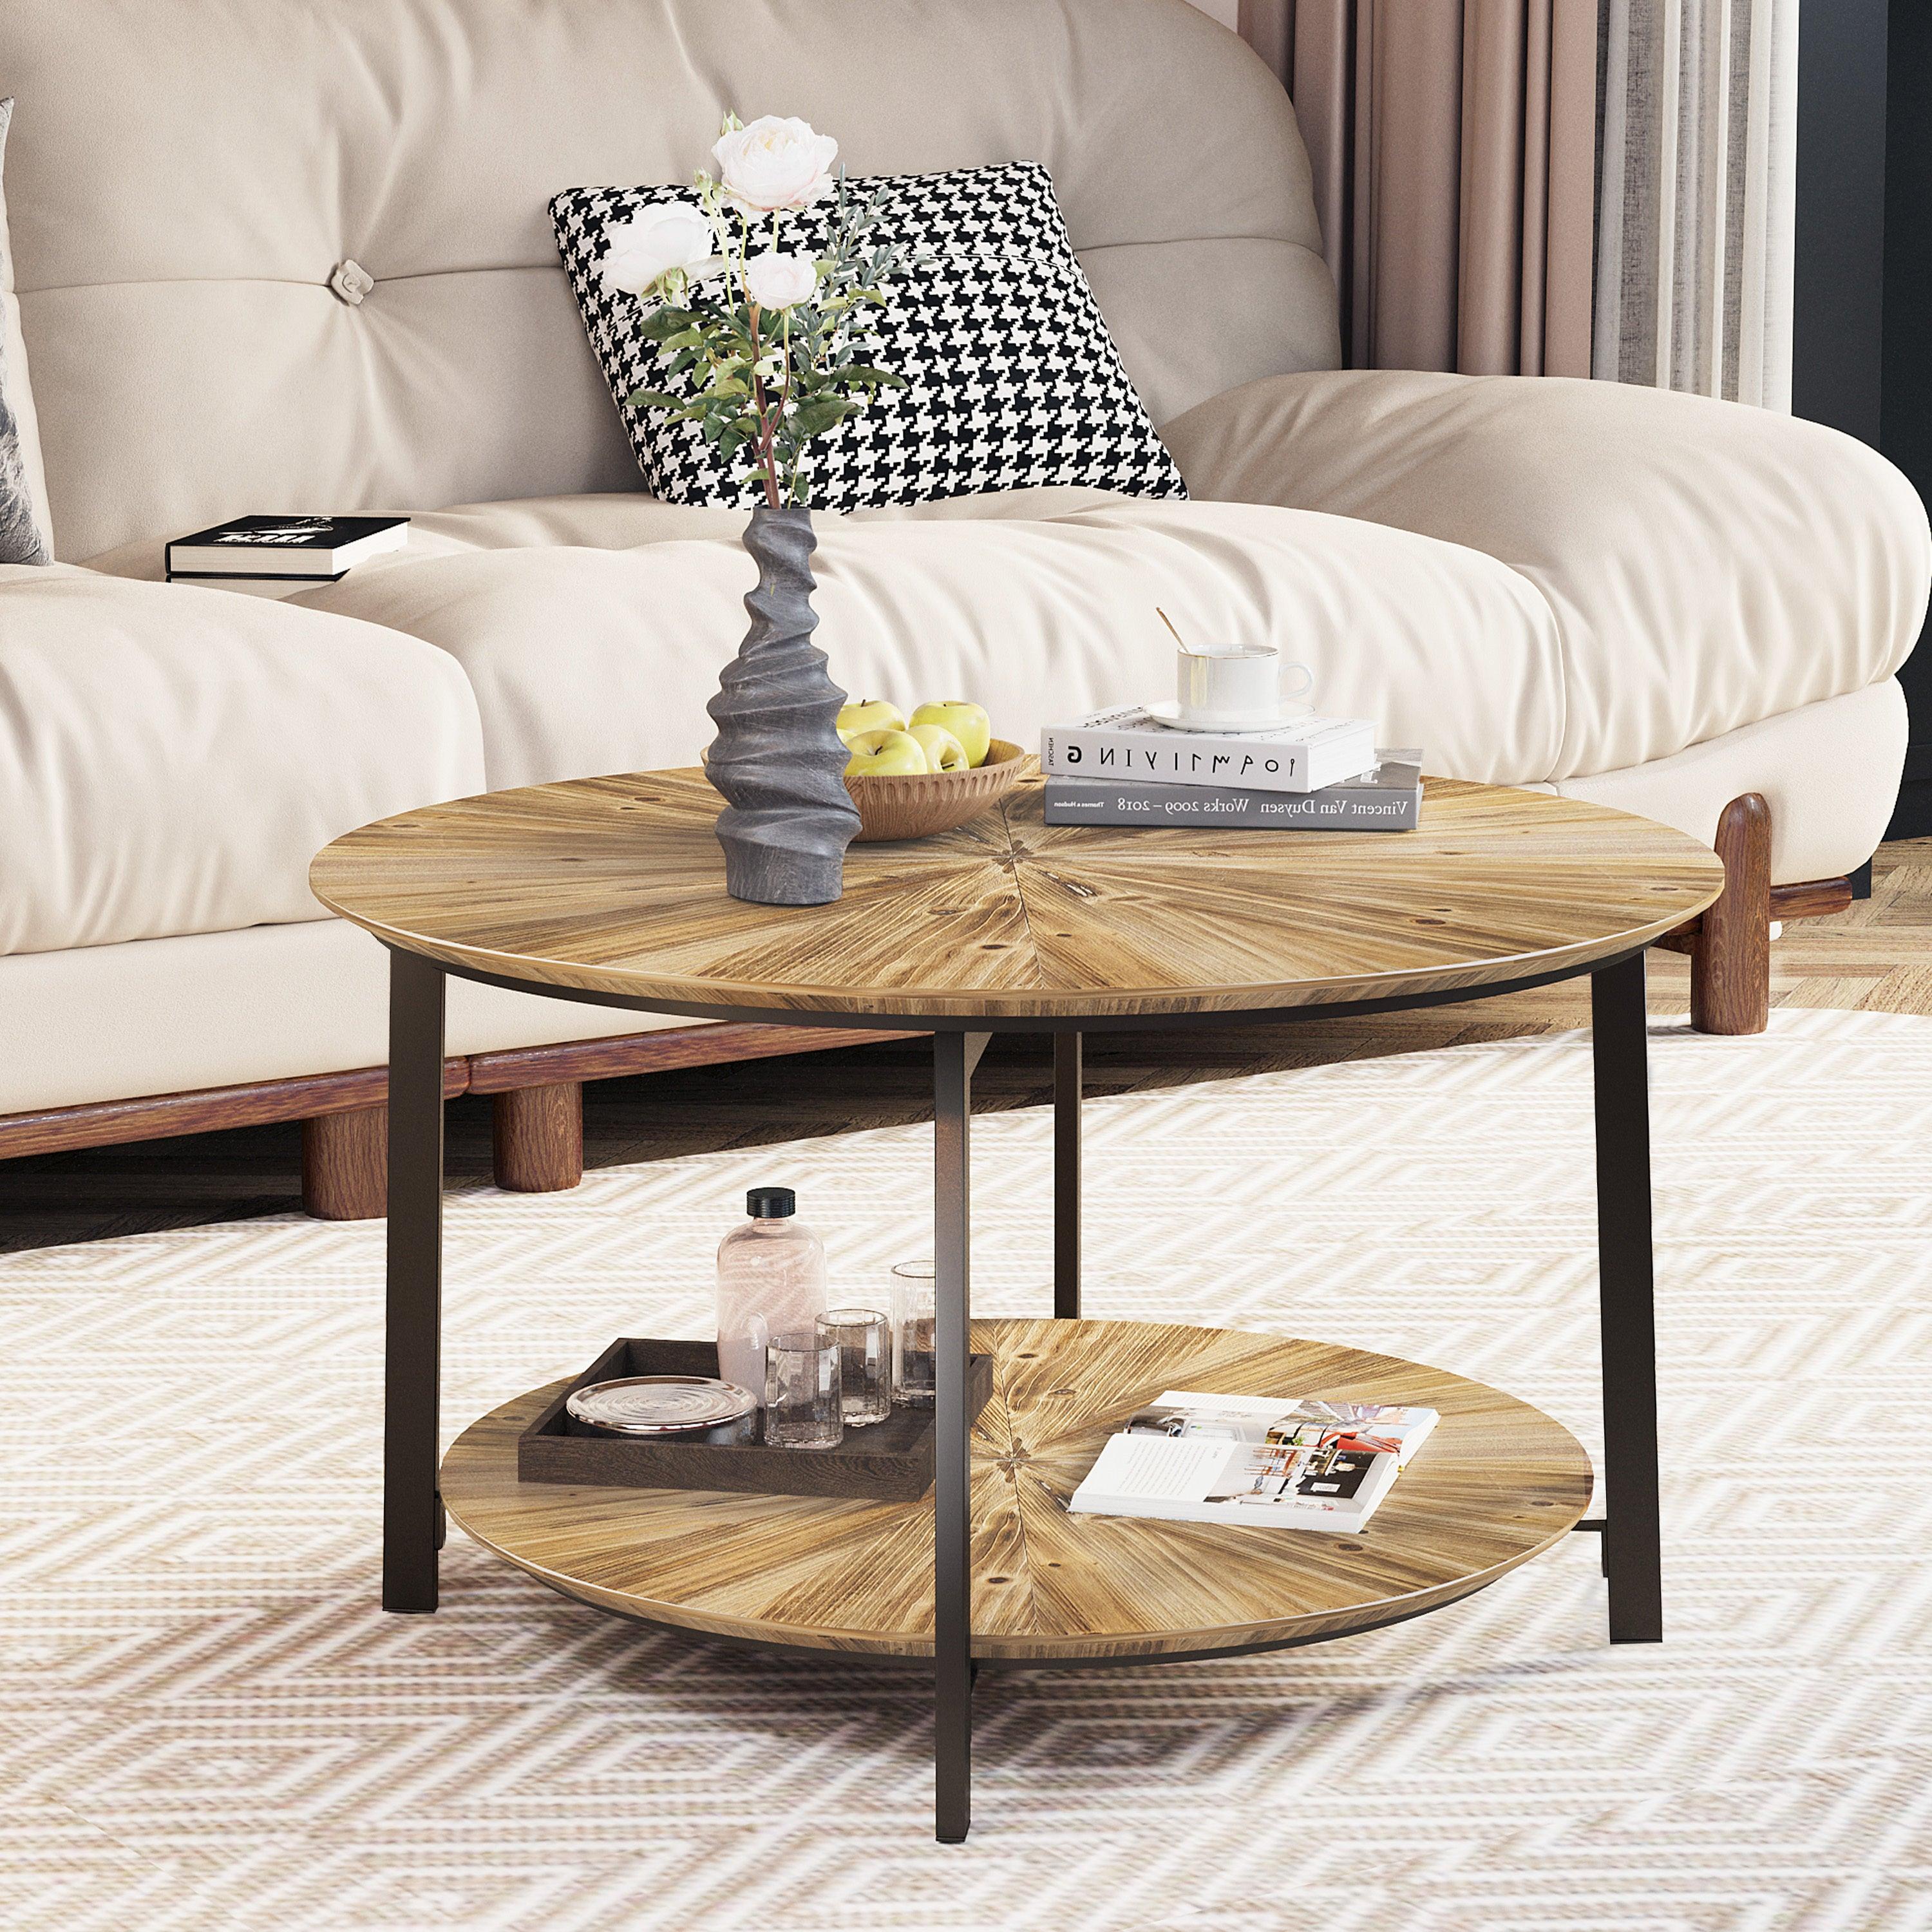 🆓🚛 31.5 "Round Coffee Table, Stand Wooden Double Layer Coffee Table With Open Storage Space & Metal Table Legs for Living Room, Bedroom